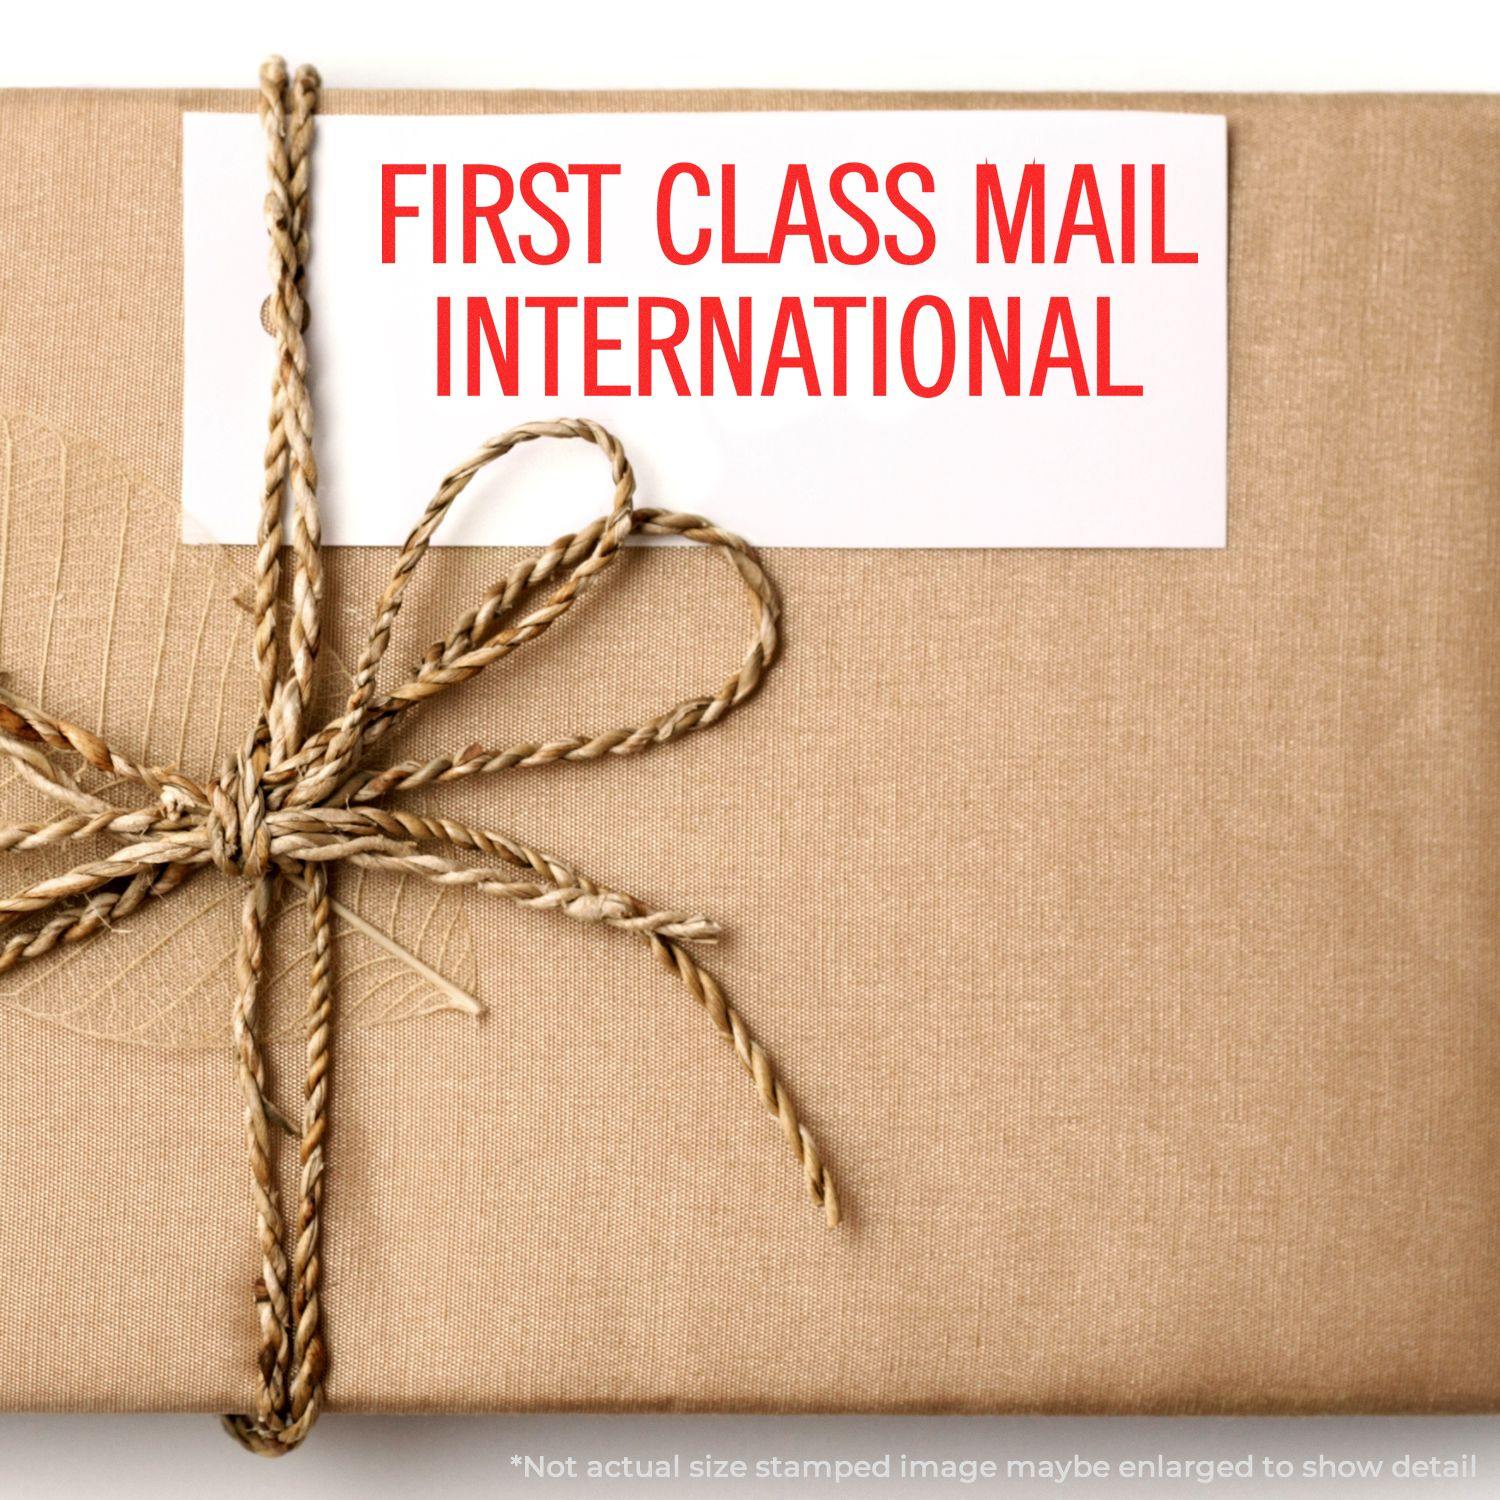 A self-inking stamp with a stamped image showing how the text "FIRST CLASS MAIL INTERNATIONAL" in a large font is displayed by it after stamping.